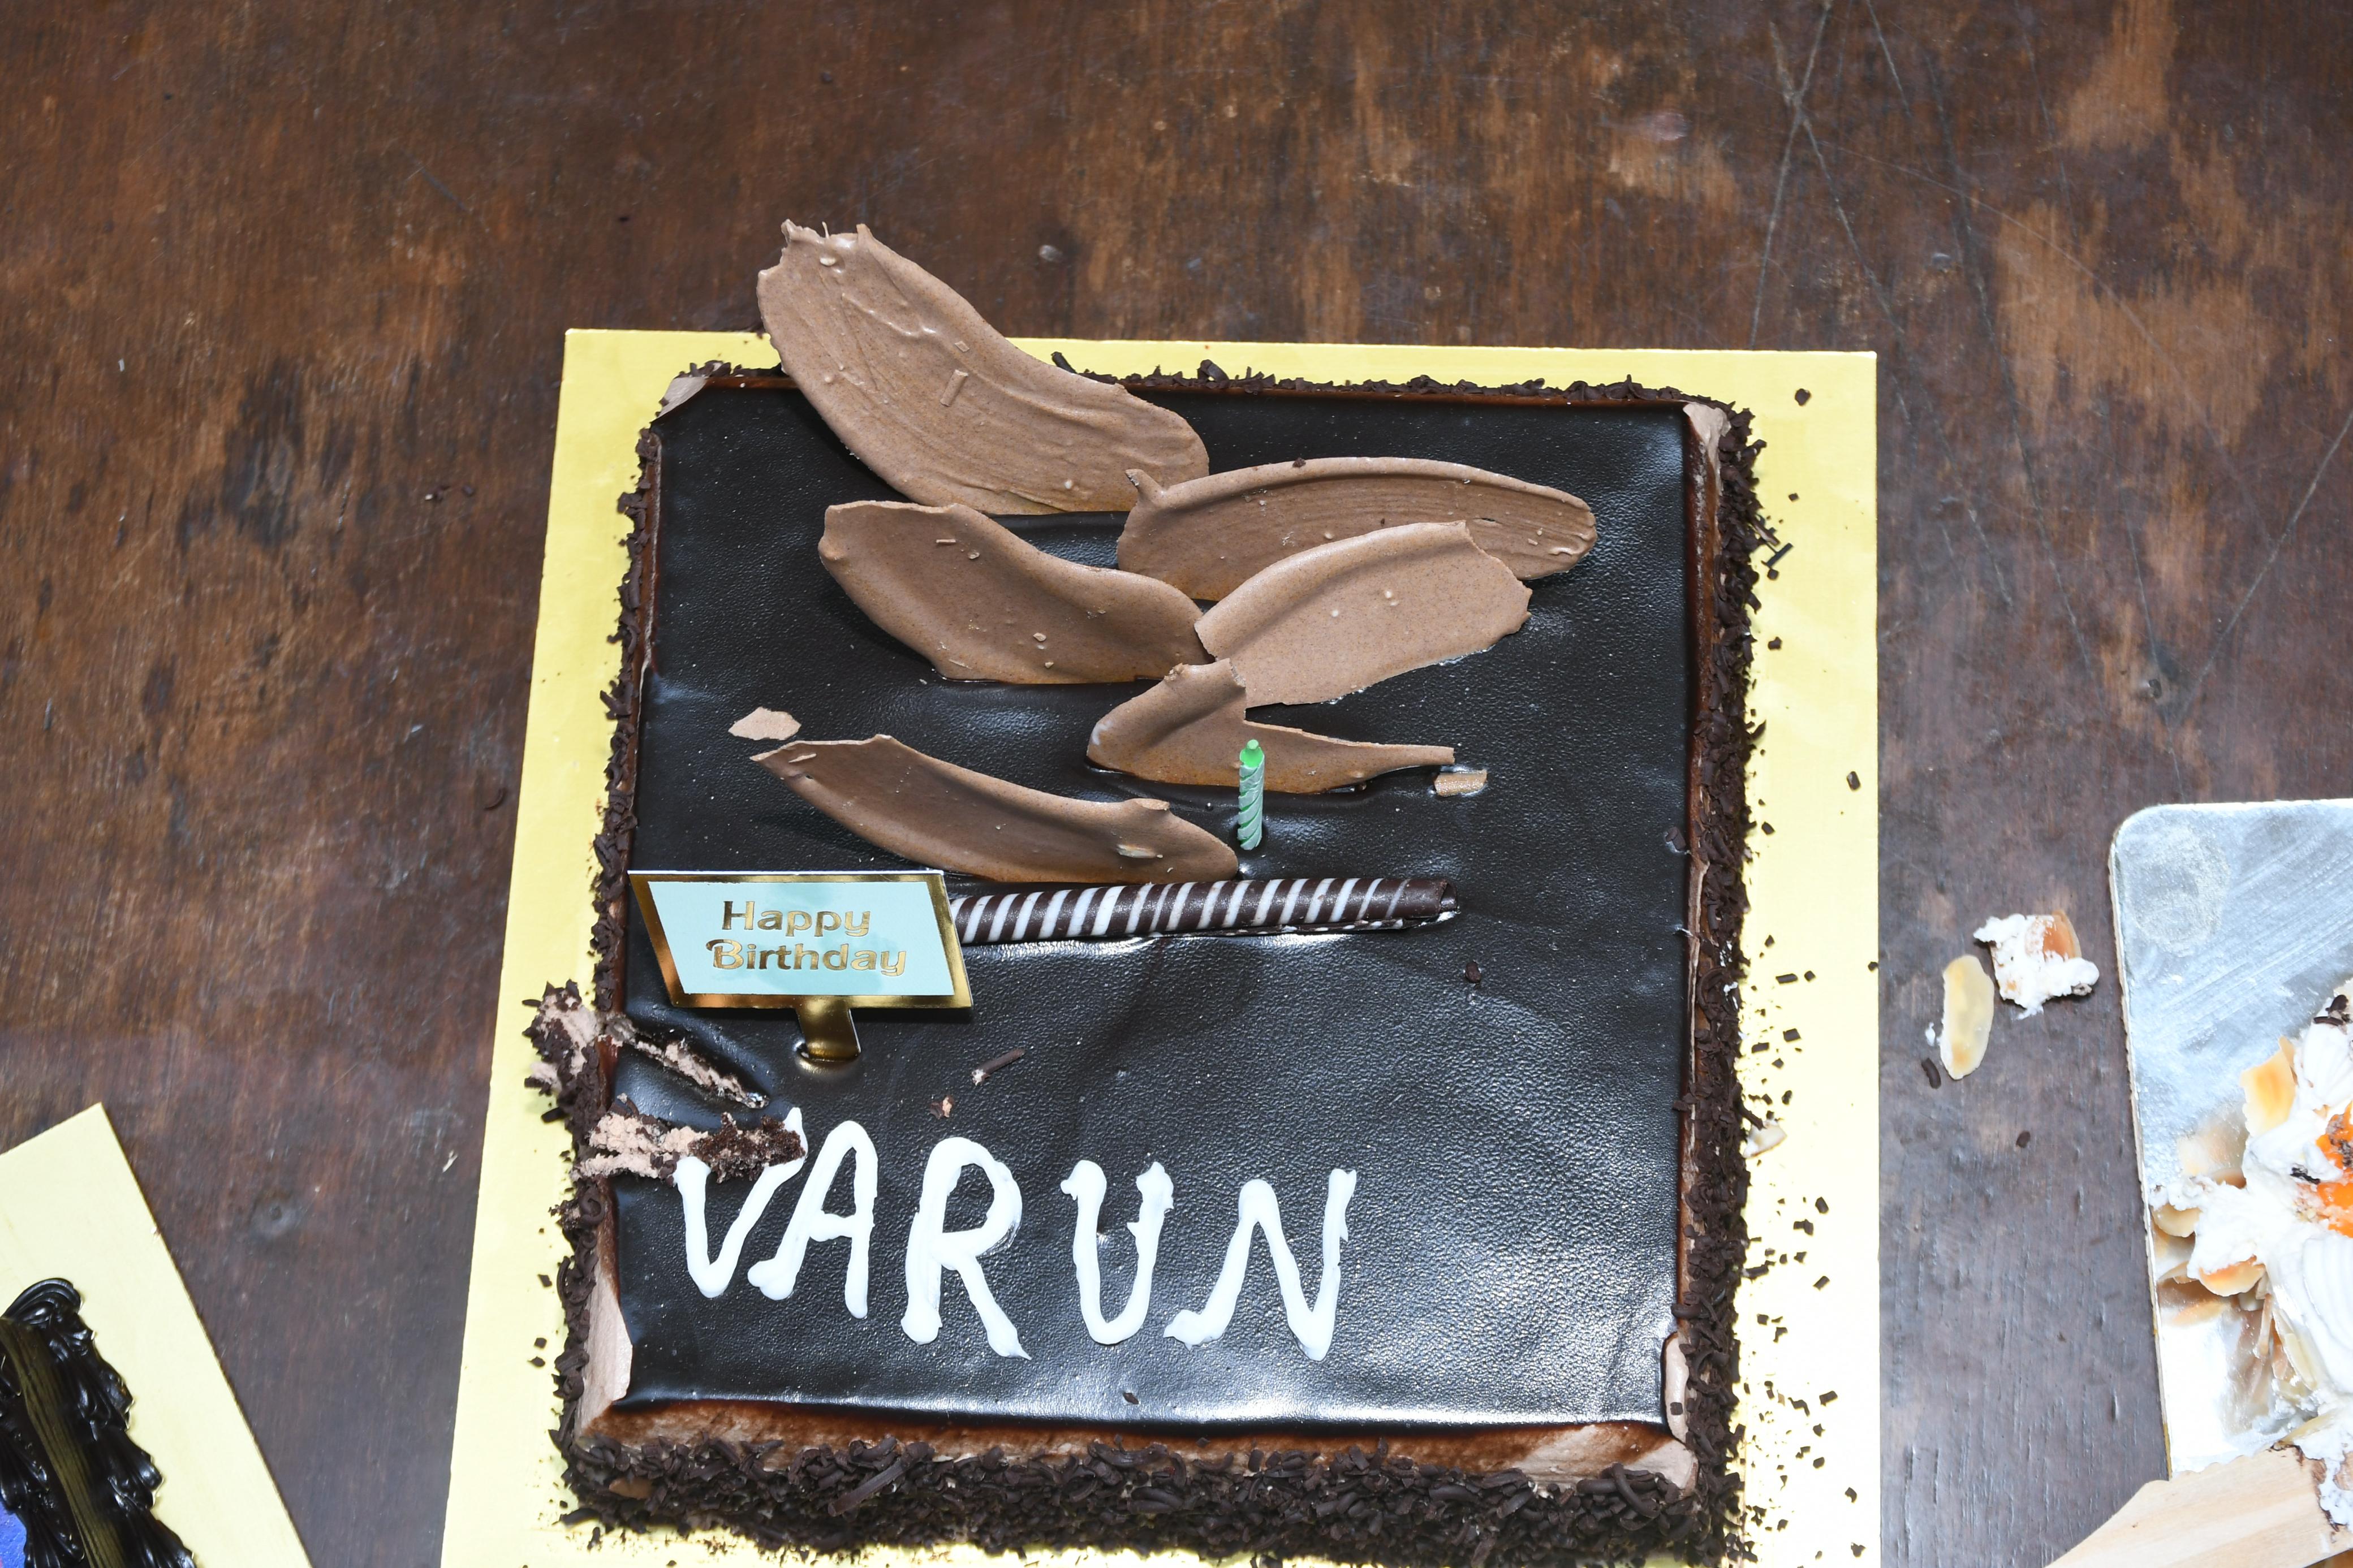 The Mumbai paparazzi got Varun Dhawan this delicious looking cake on account of the actor's birthday